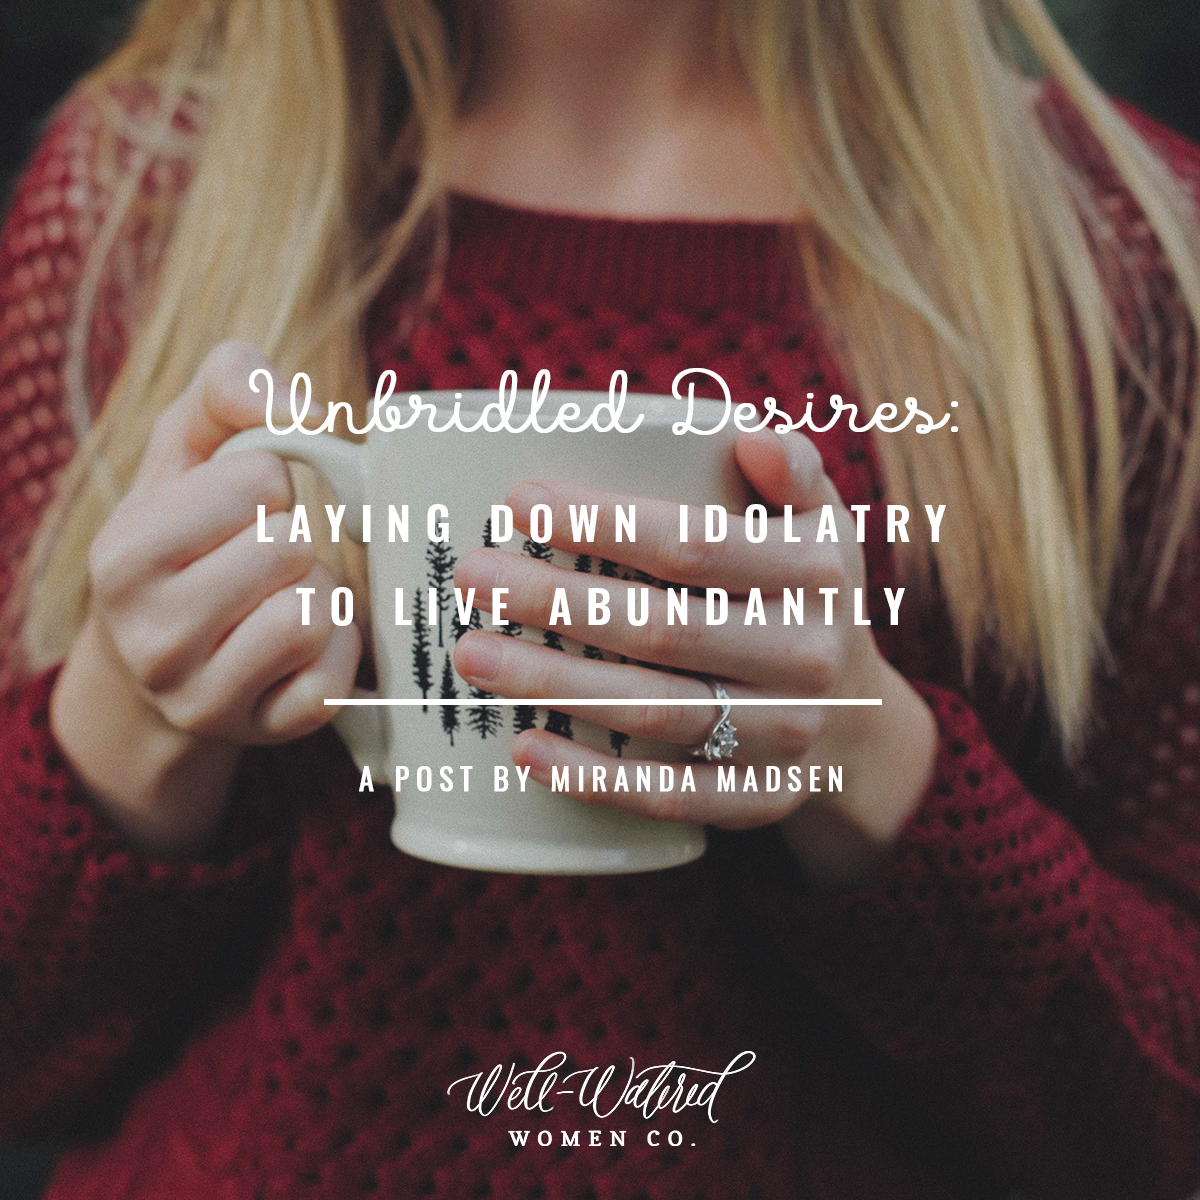 Well-Watered Women-Blog-Unbridled Desires-Laying Down Idolatry to Live Abundantly